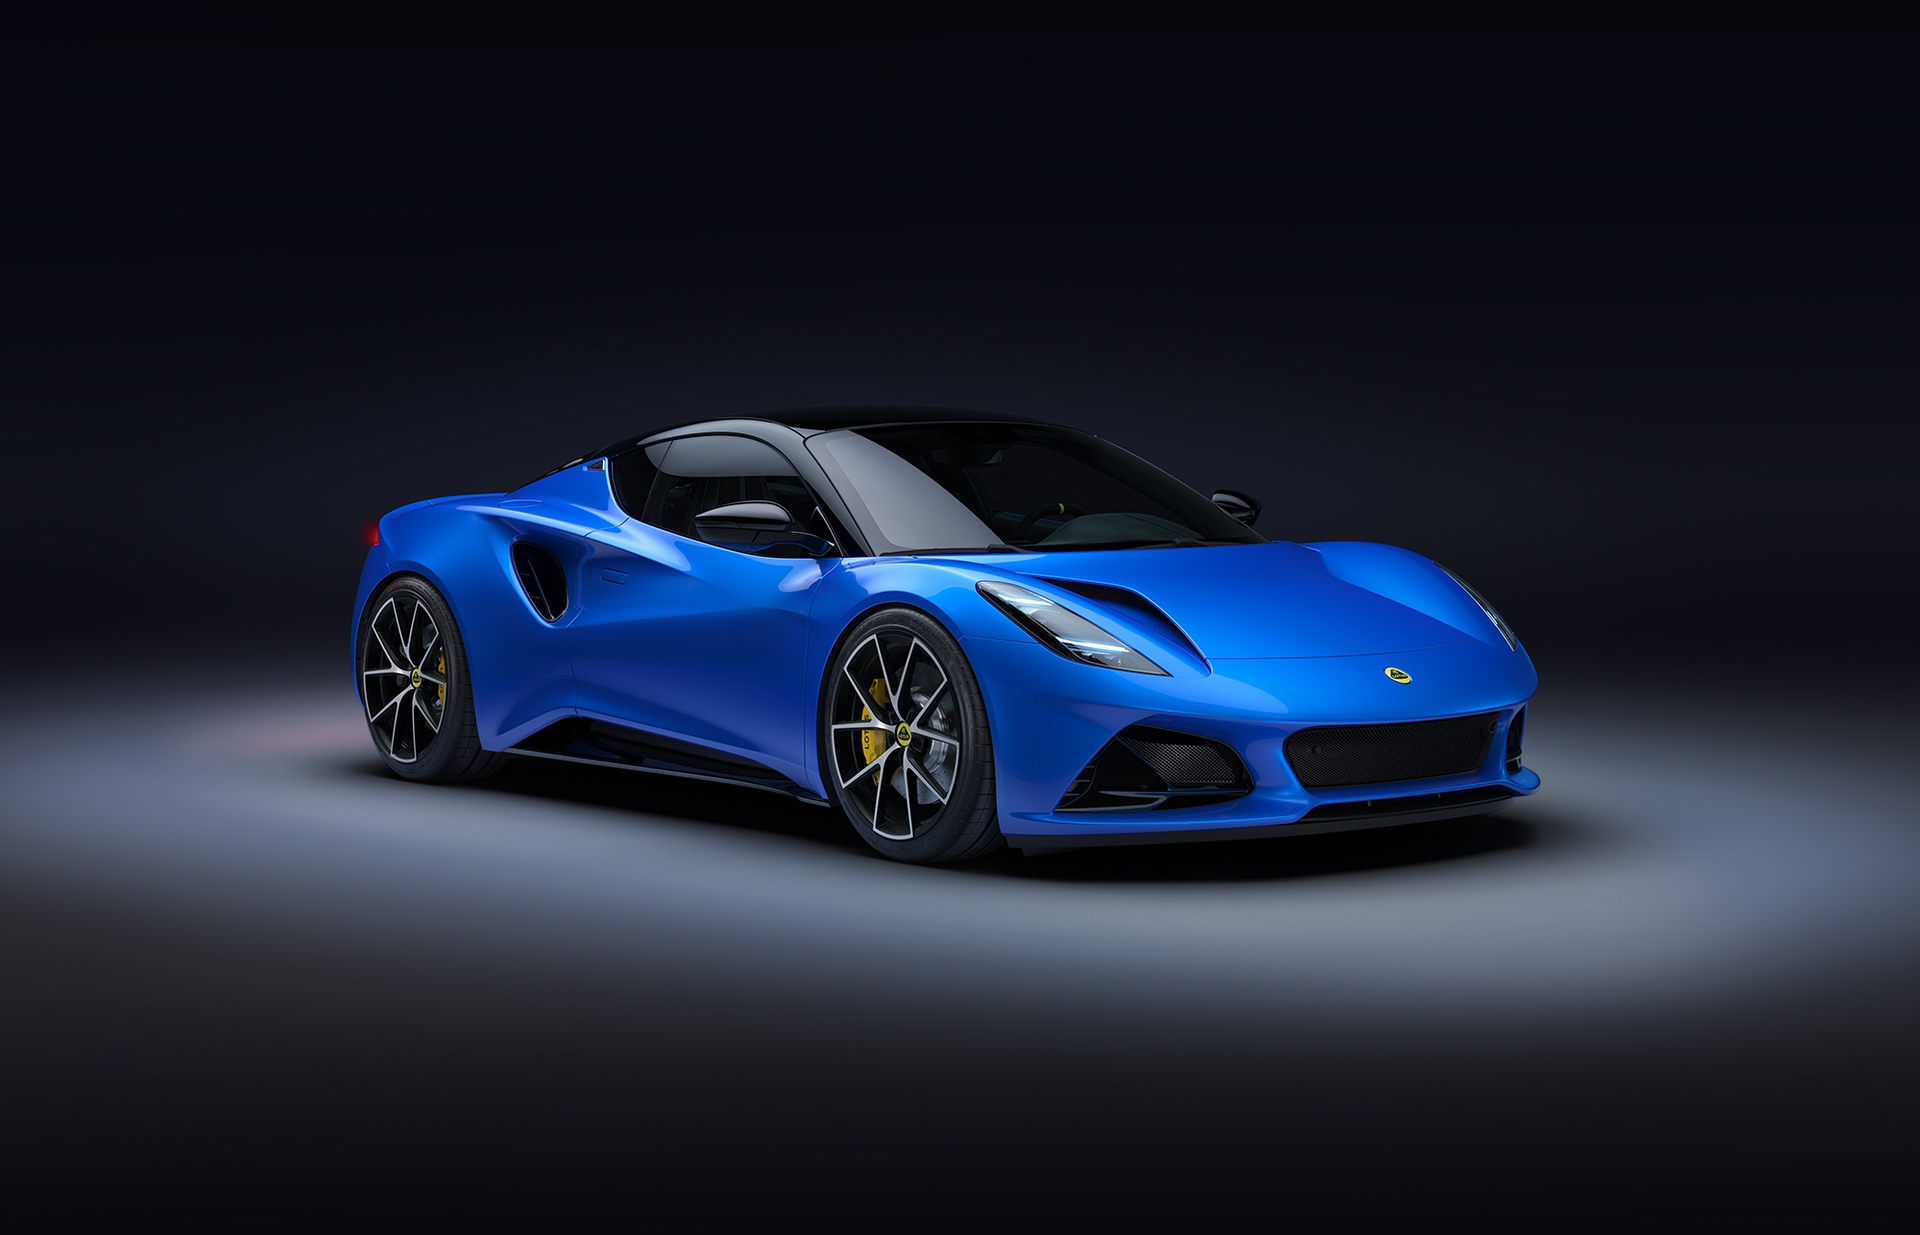 The 2023 Emira, the last combustion engine car Lotus will ever make